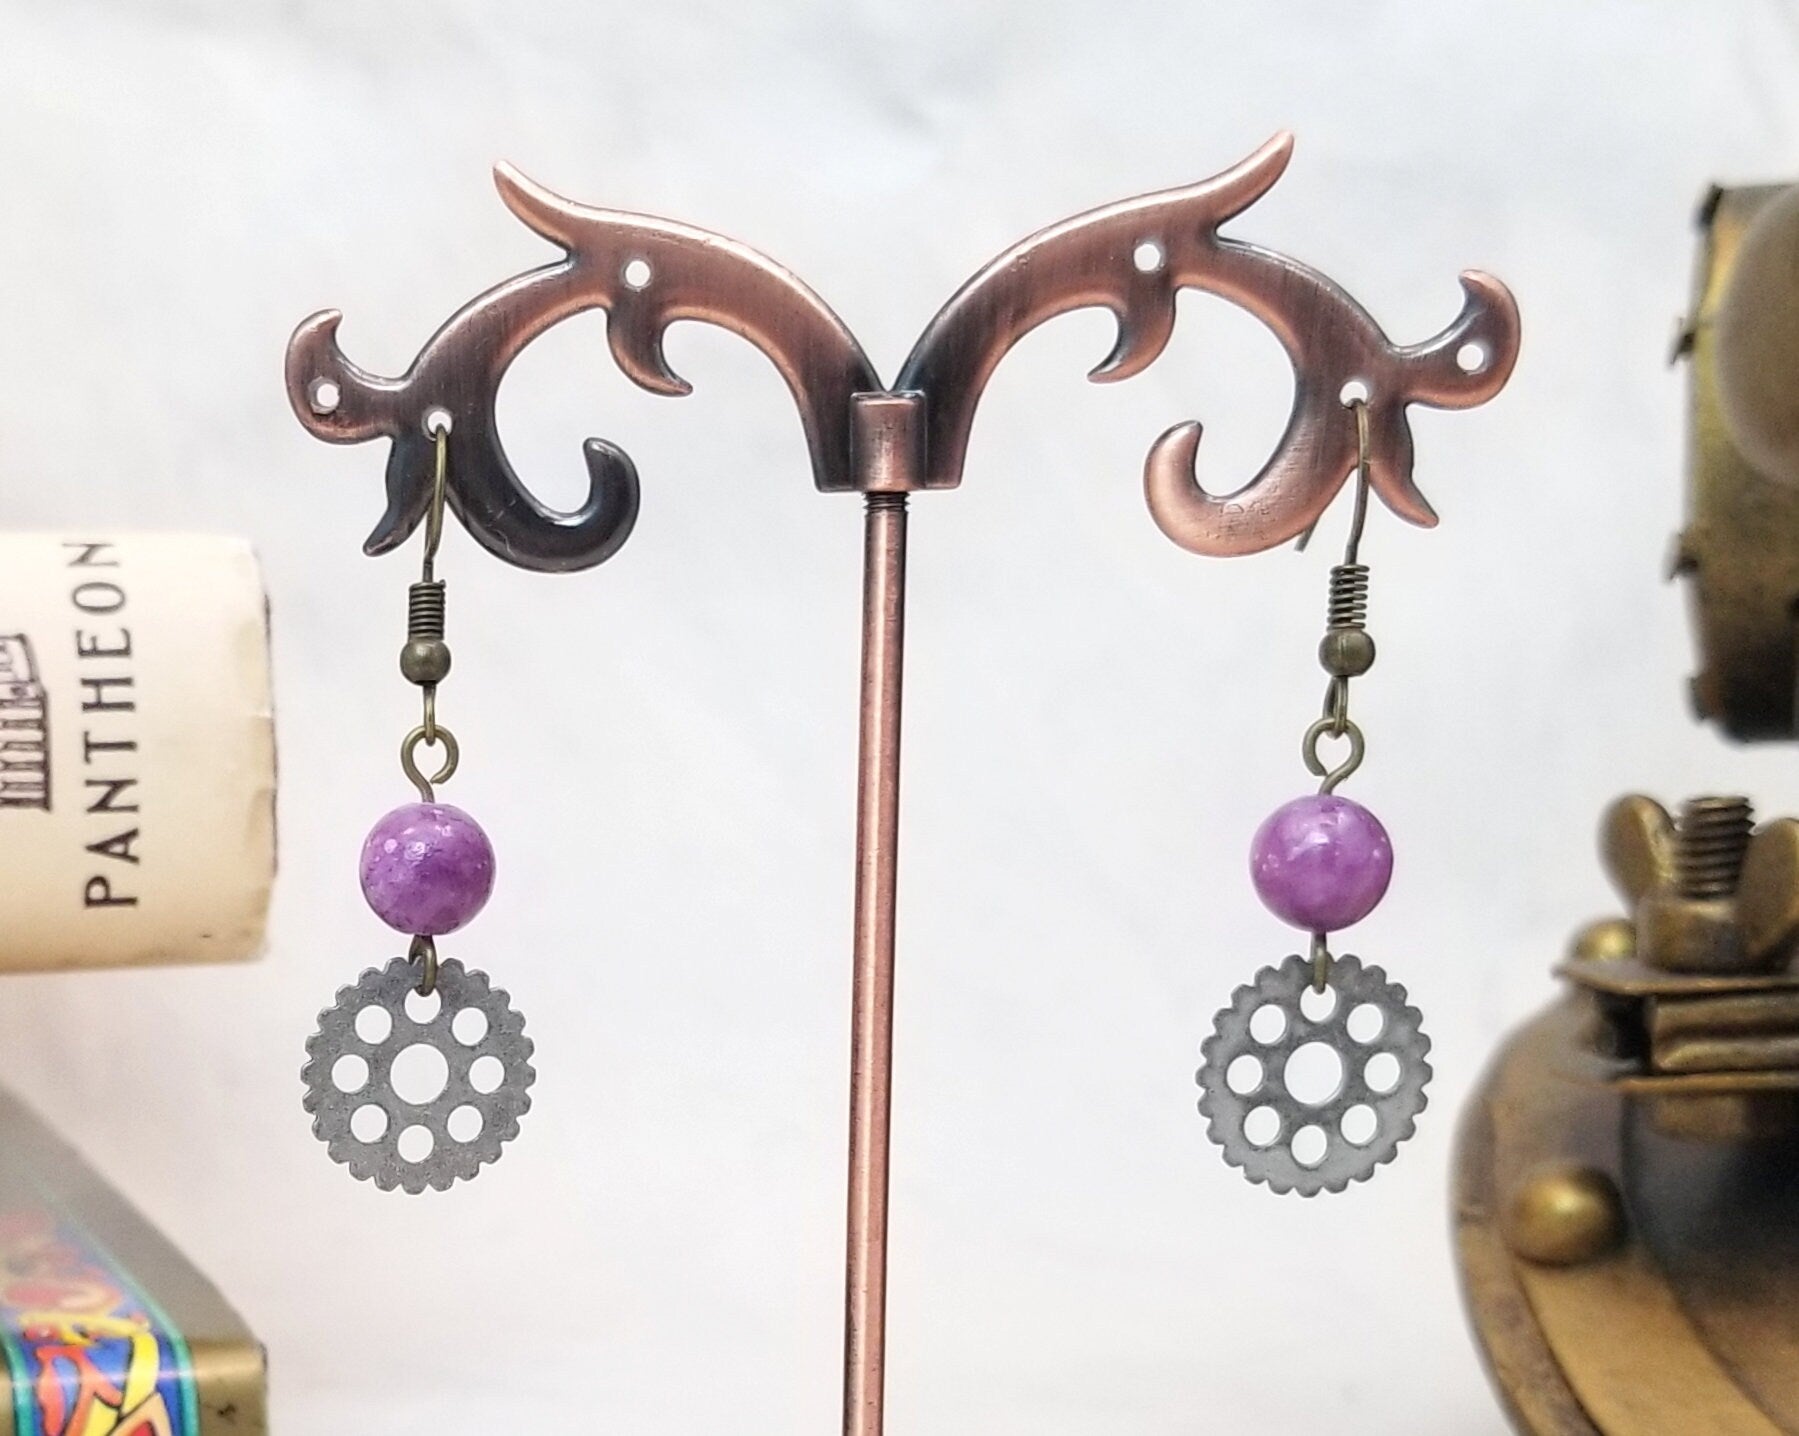 Steampunk Earrings with Beads Over Gears, Party, Wedding, Bridesmaid, Choice of Colors